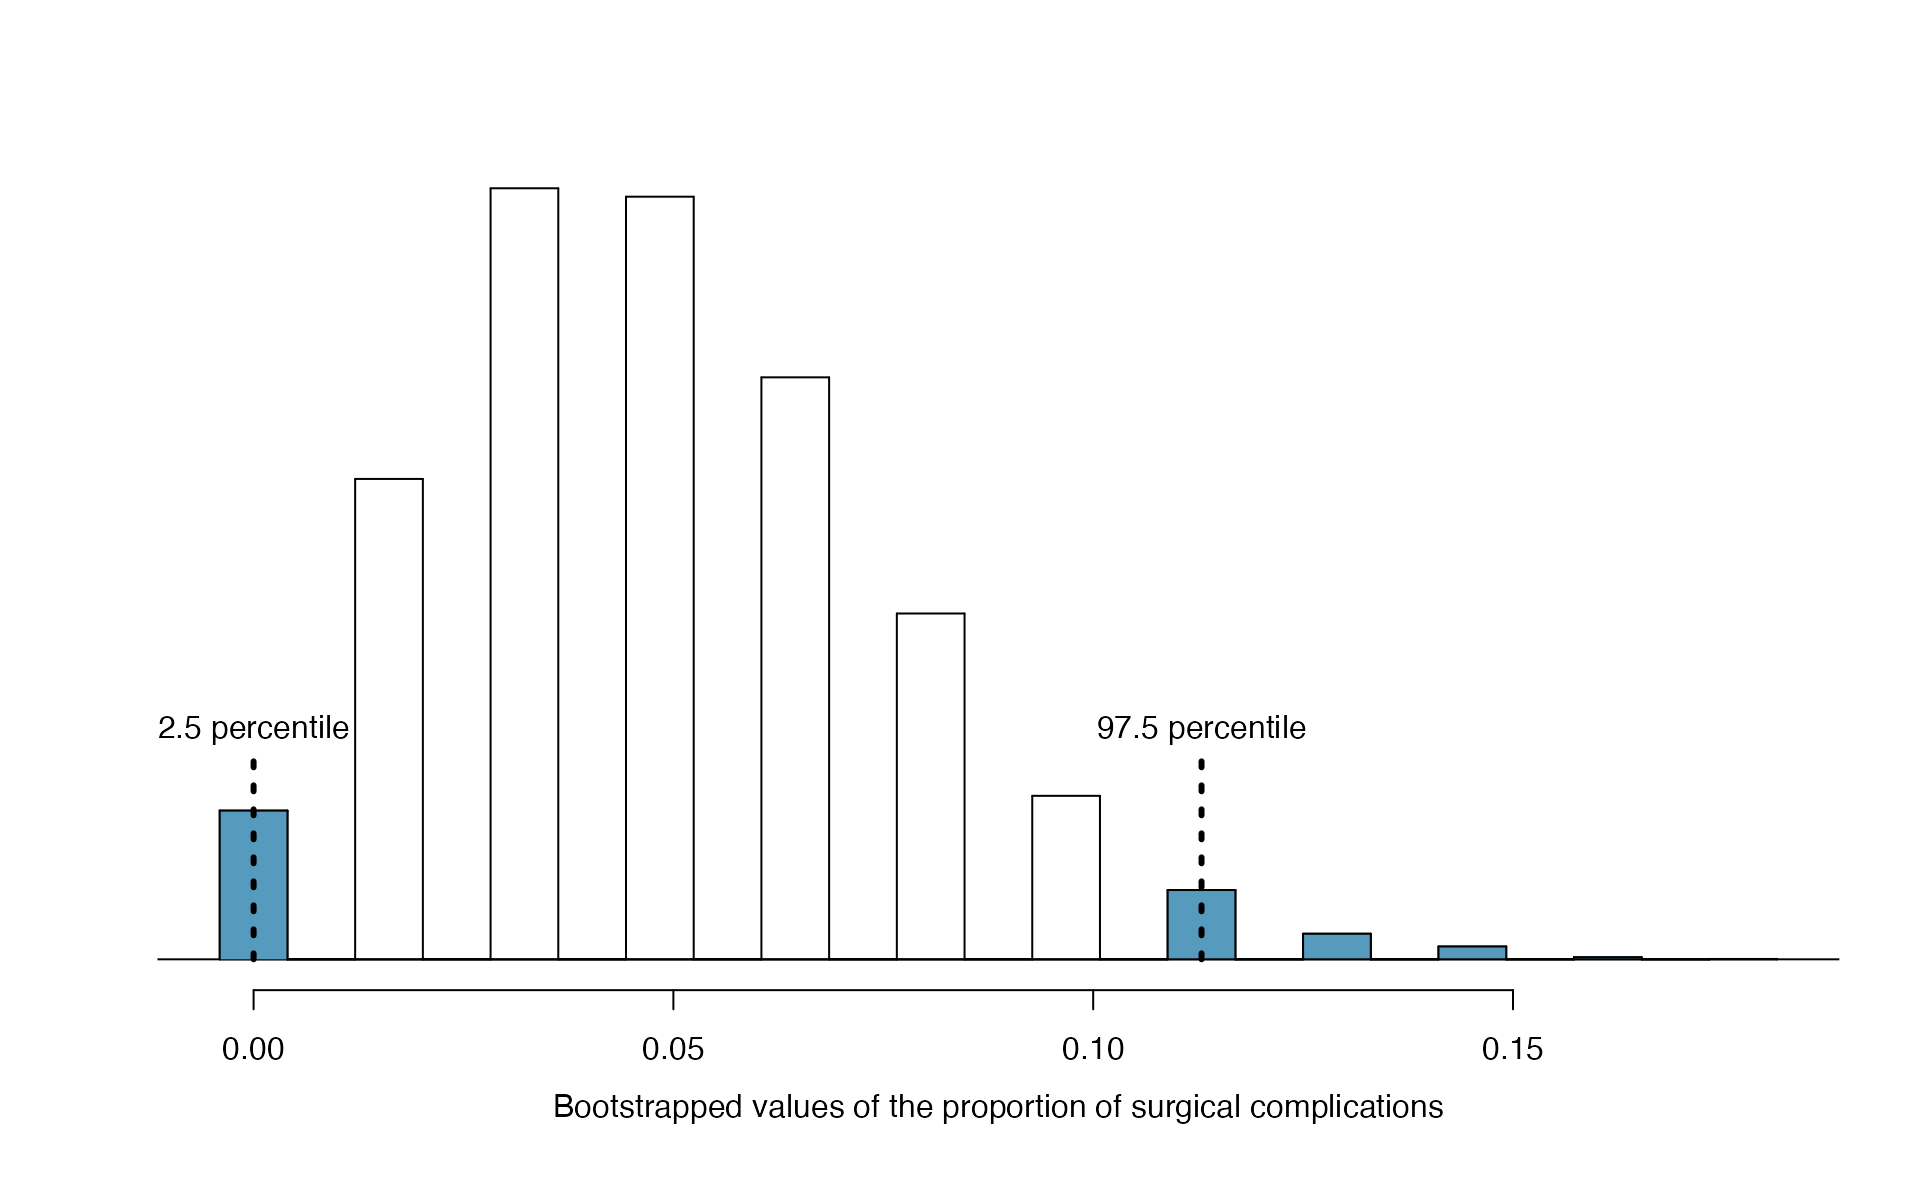 The original medical consultant data is bootstrapped 10,000 times. Each simulation creates a sample from the original data where the probability of a complication is $\hat{p} = 3/62$. The bootstrap 2.5 percentile proportion is 0 and the 97.5 percentile is 0.113. The result is: we are confident that, in the population, the true probability of a complication is between 0% and 11.3%.